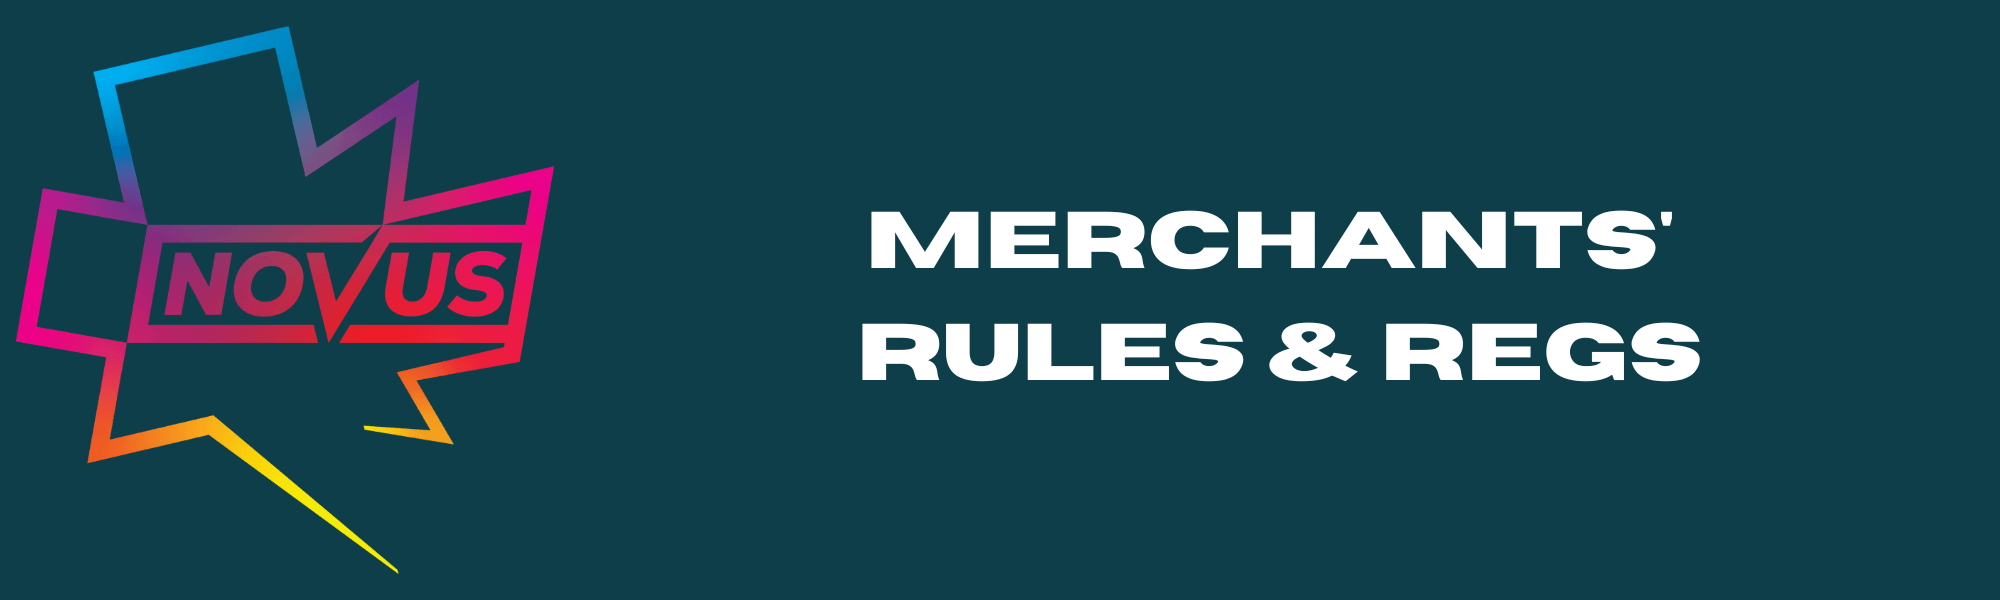 Merchants Rules and Regs